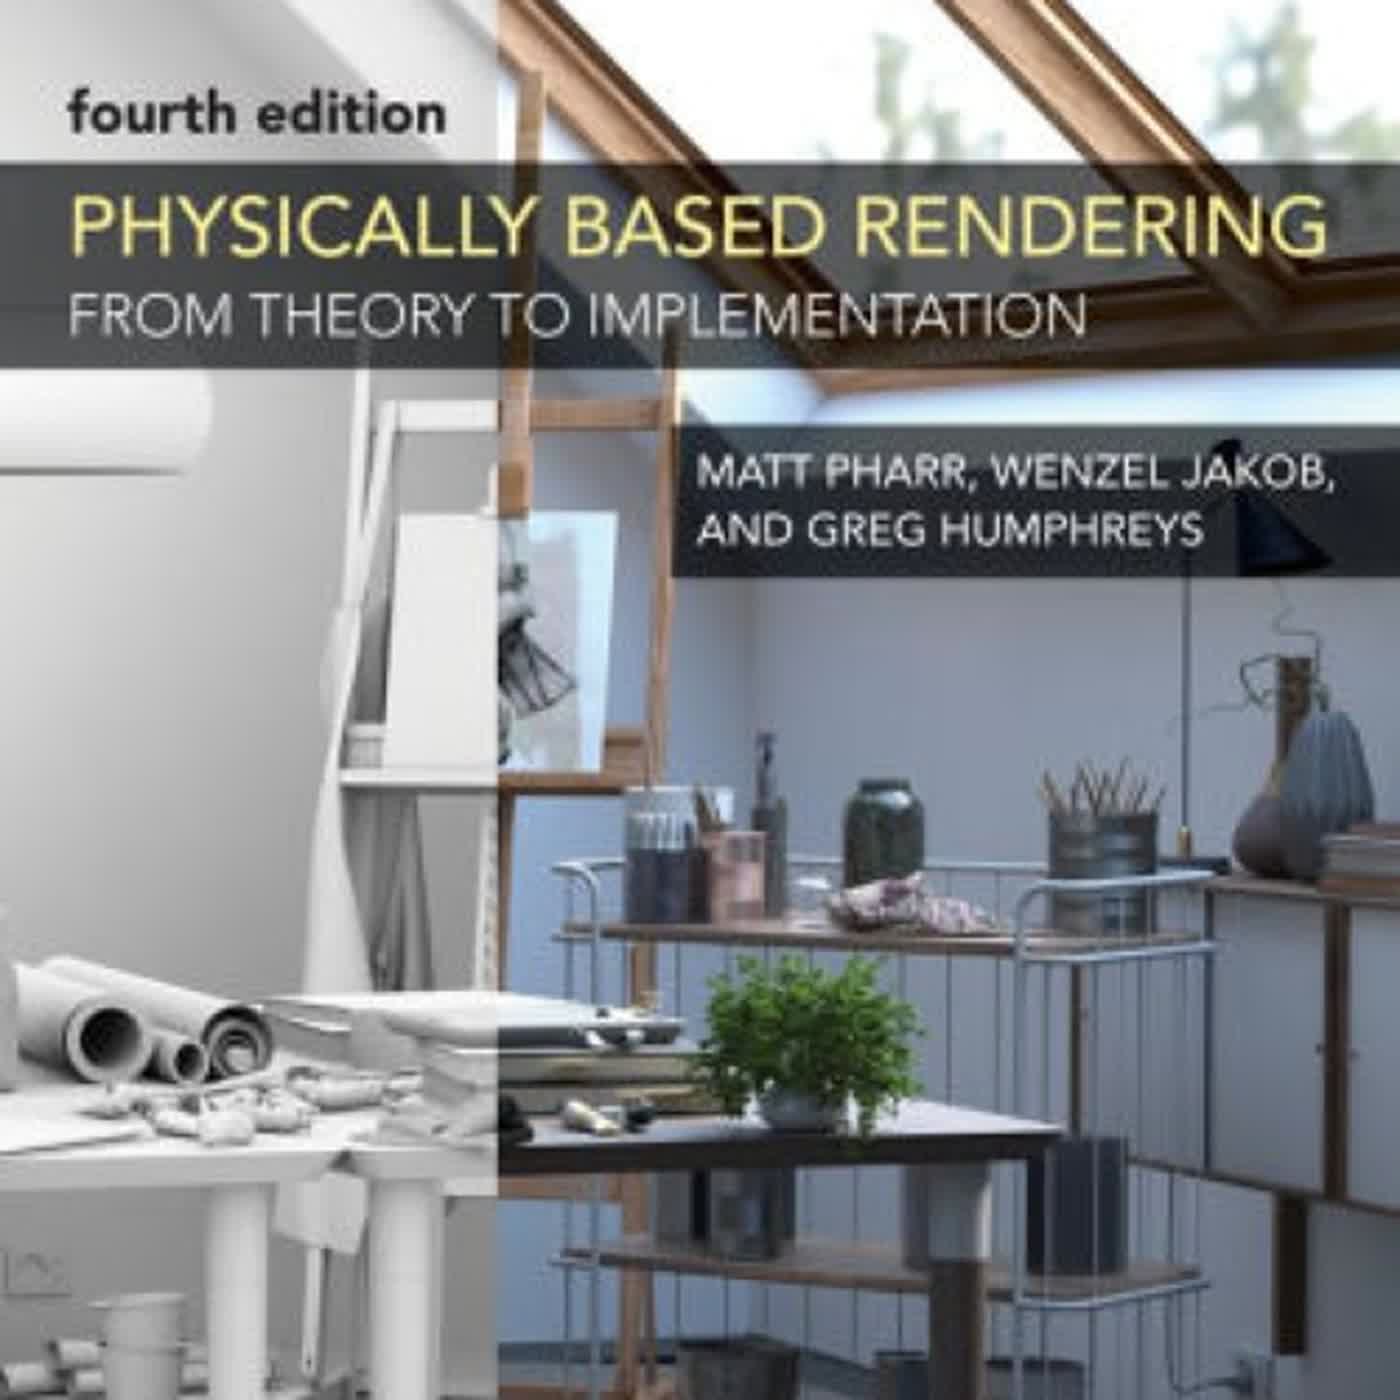 Physically Based Rendering, fourth edition: From Theory to Implementation by Matt Pharr, Wenzel Jakob, Greg Humphreys on Audiobook New